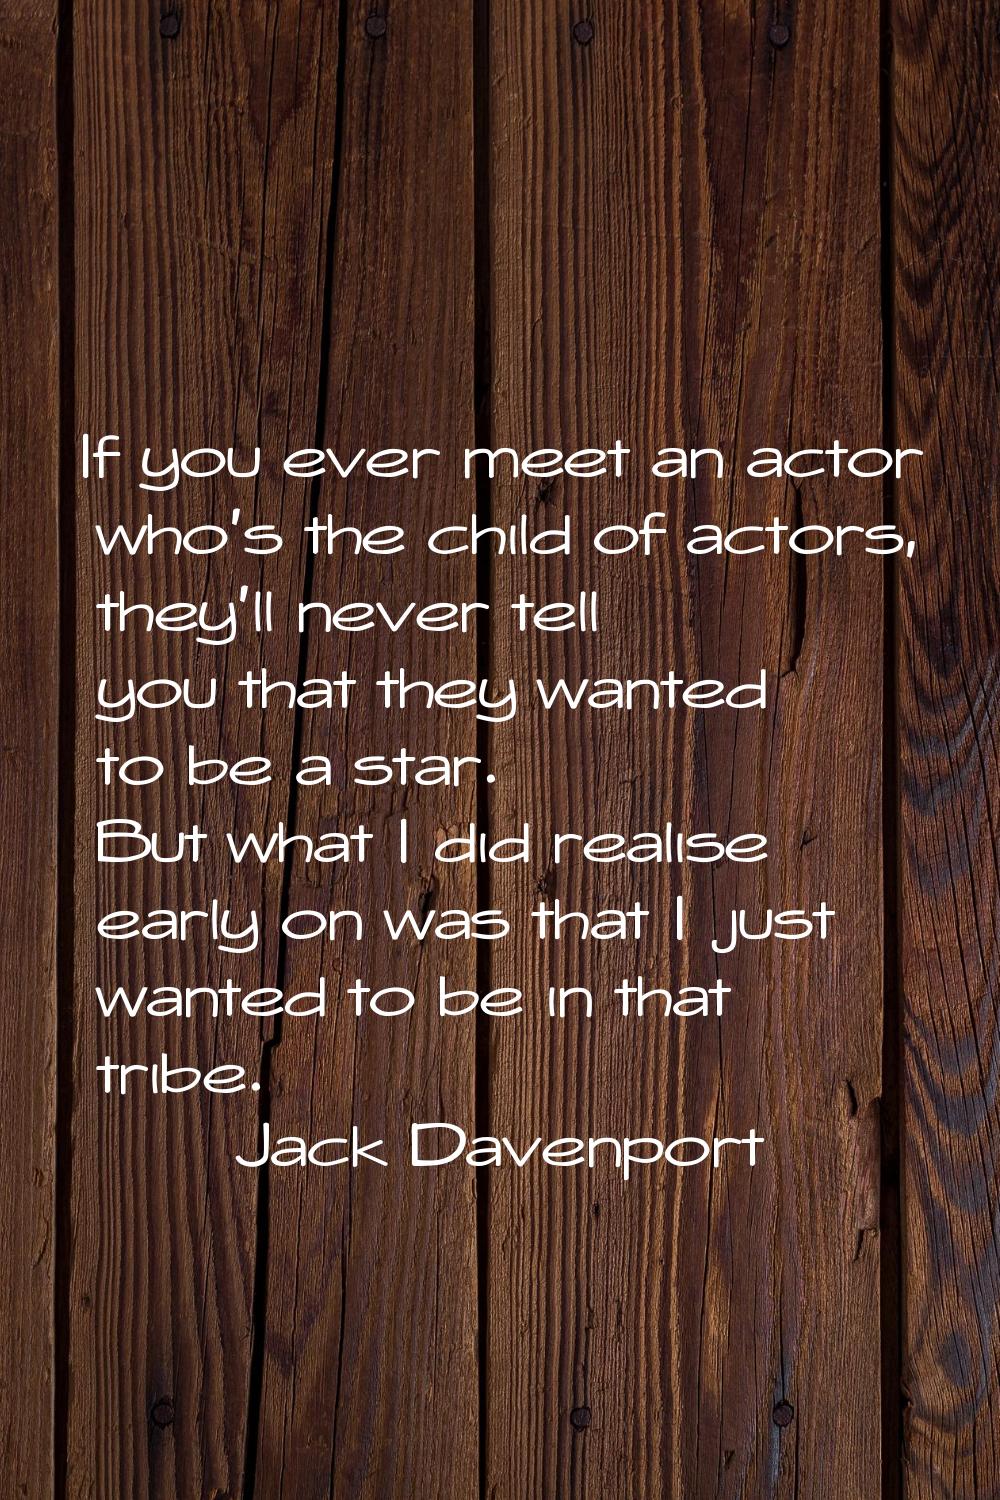 If you ever meet an actor who's the child of actors, they'll never tell you that they wanted to be 